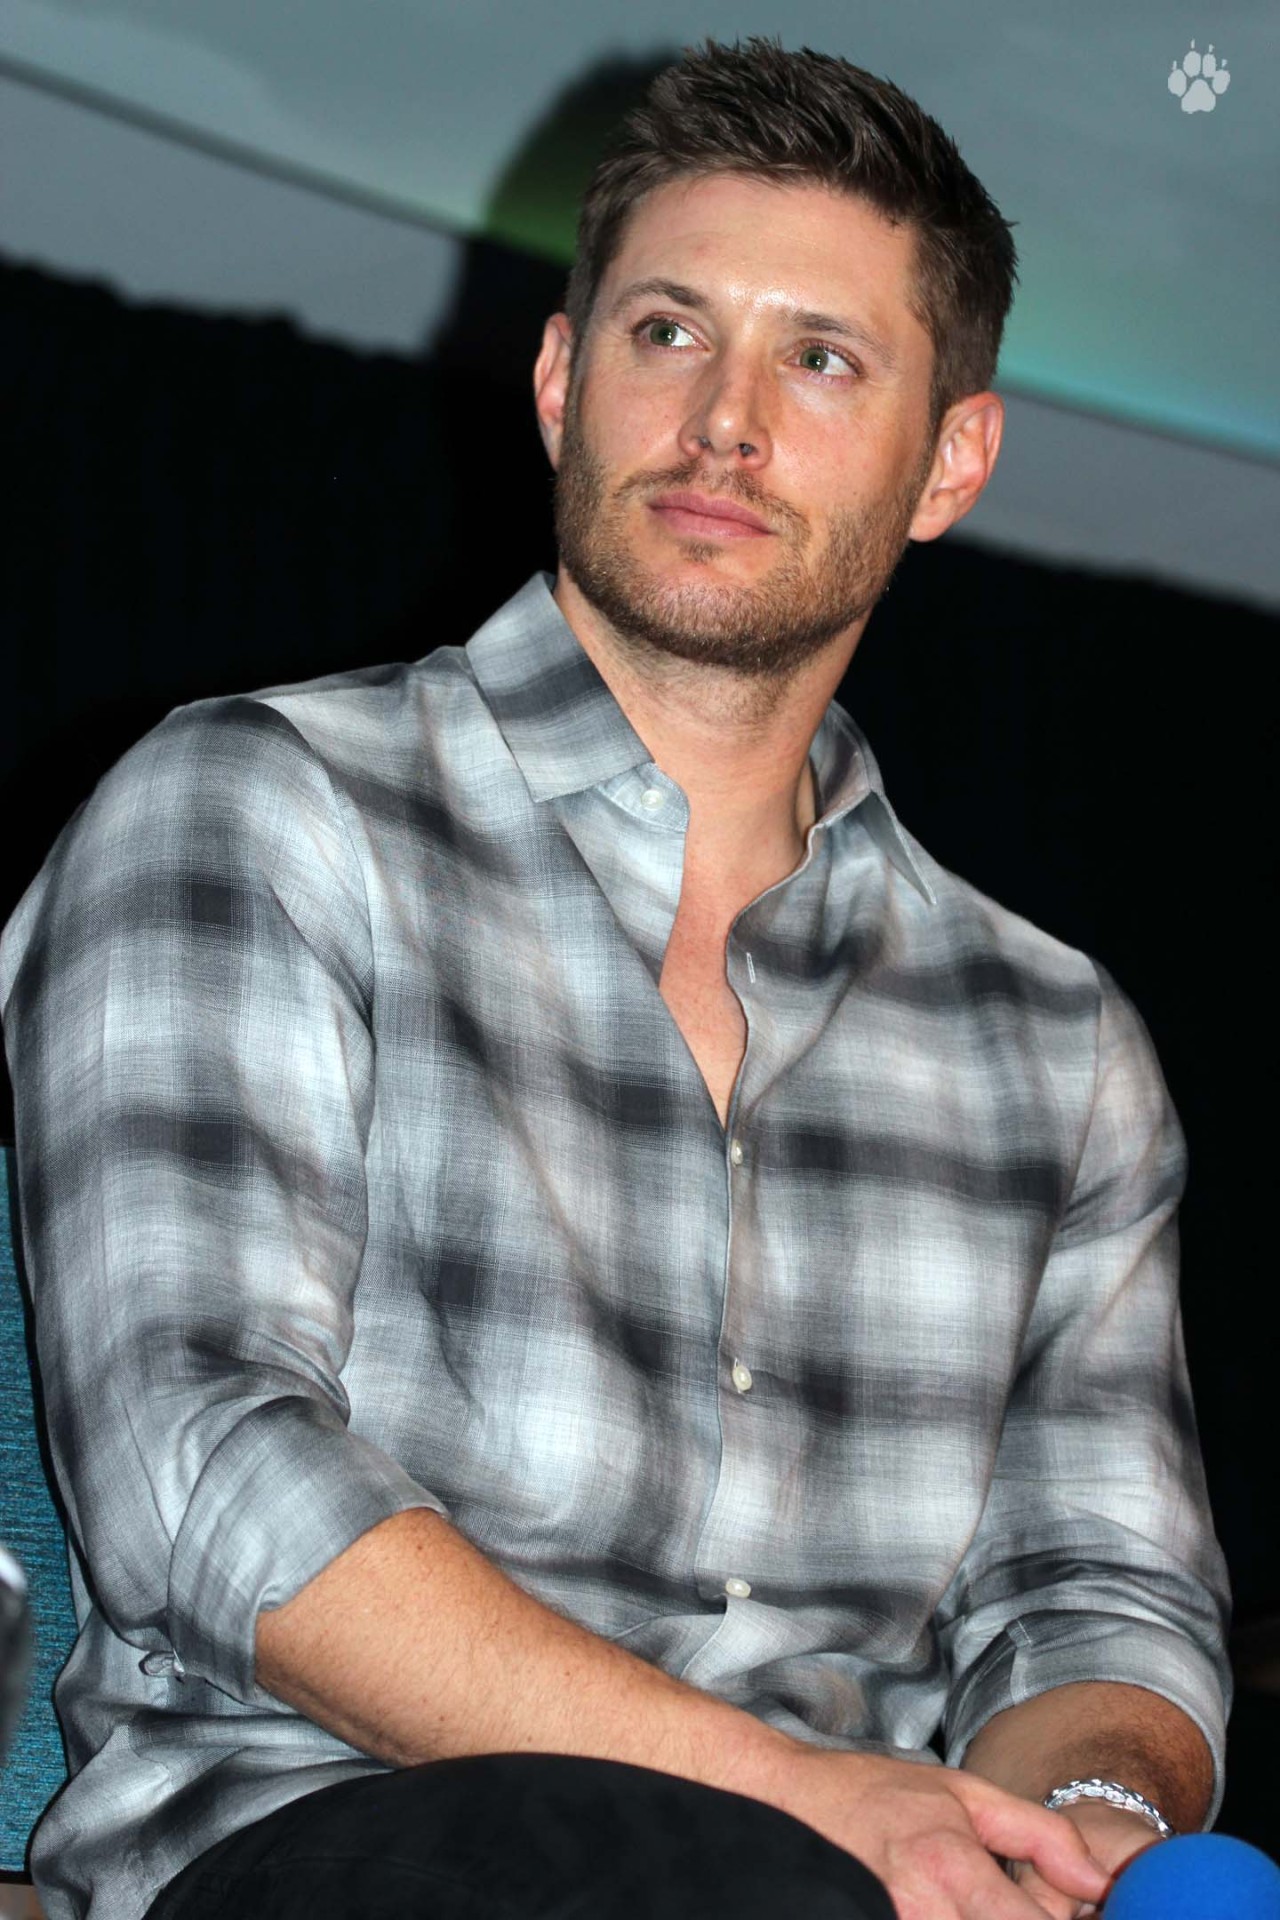 Be strong in the times where you want to be weak. -Jensen Ackles